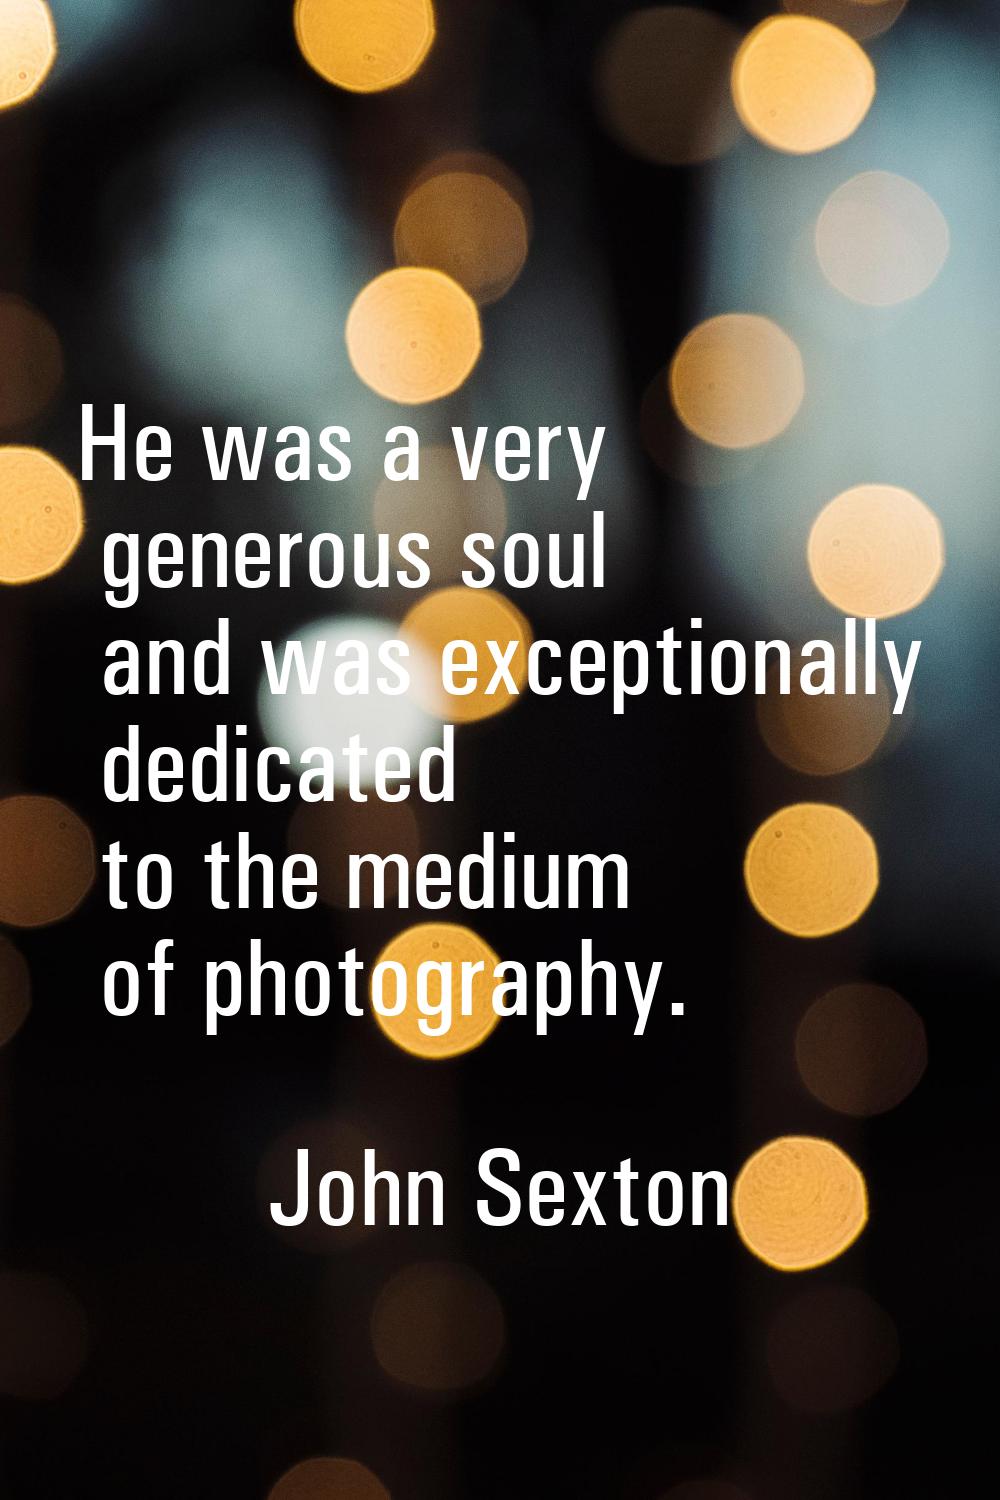 He was a very generous soul and was exceptionally dedicated to the medium of photography.